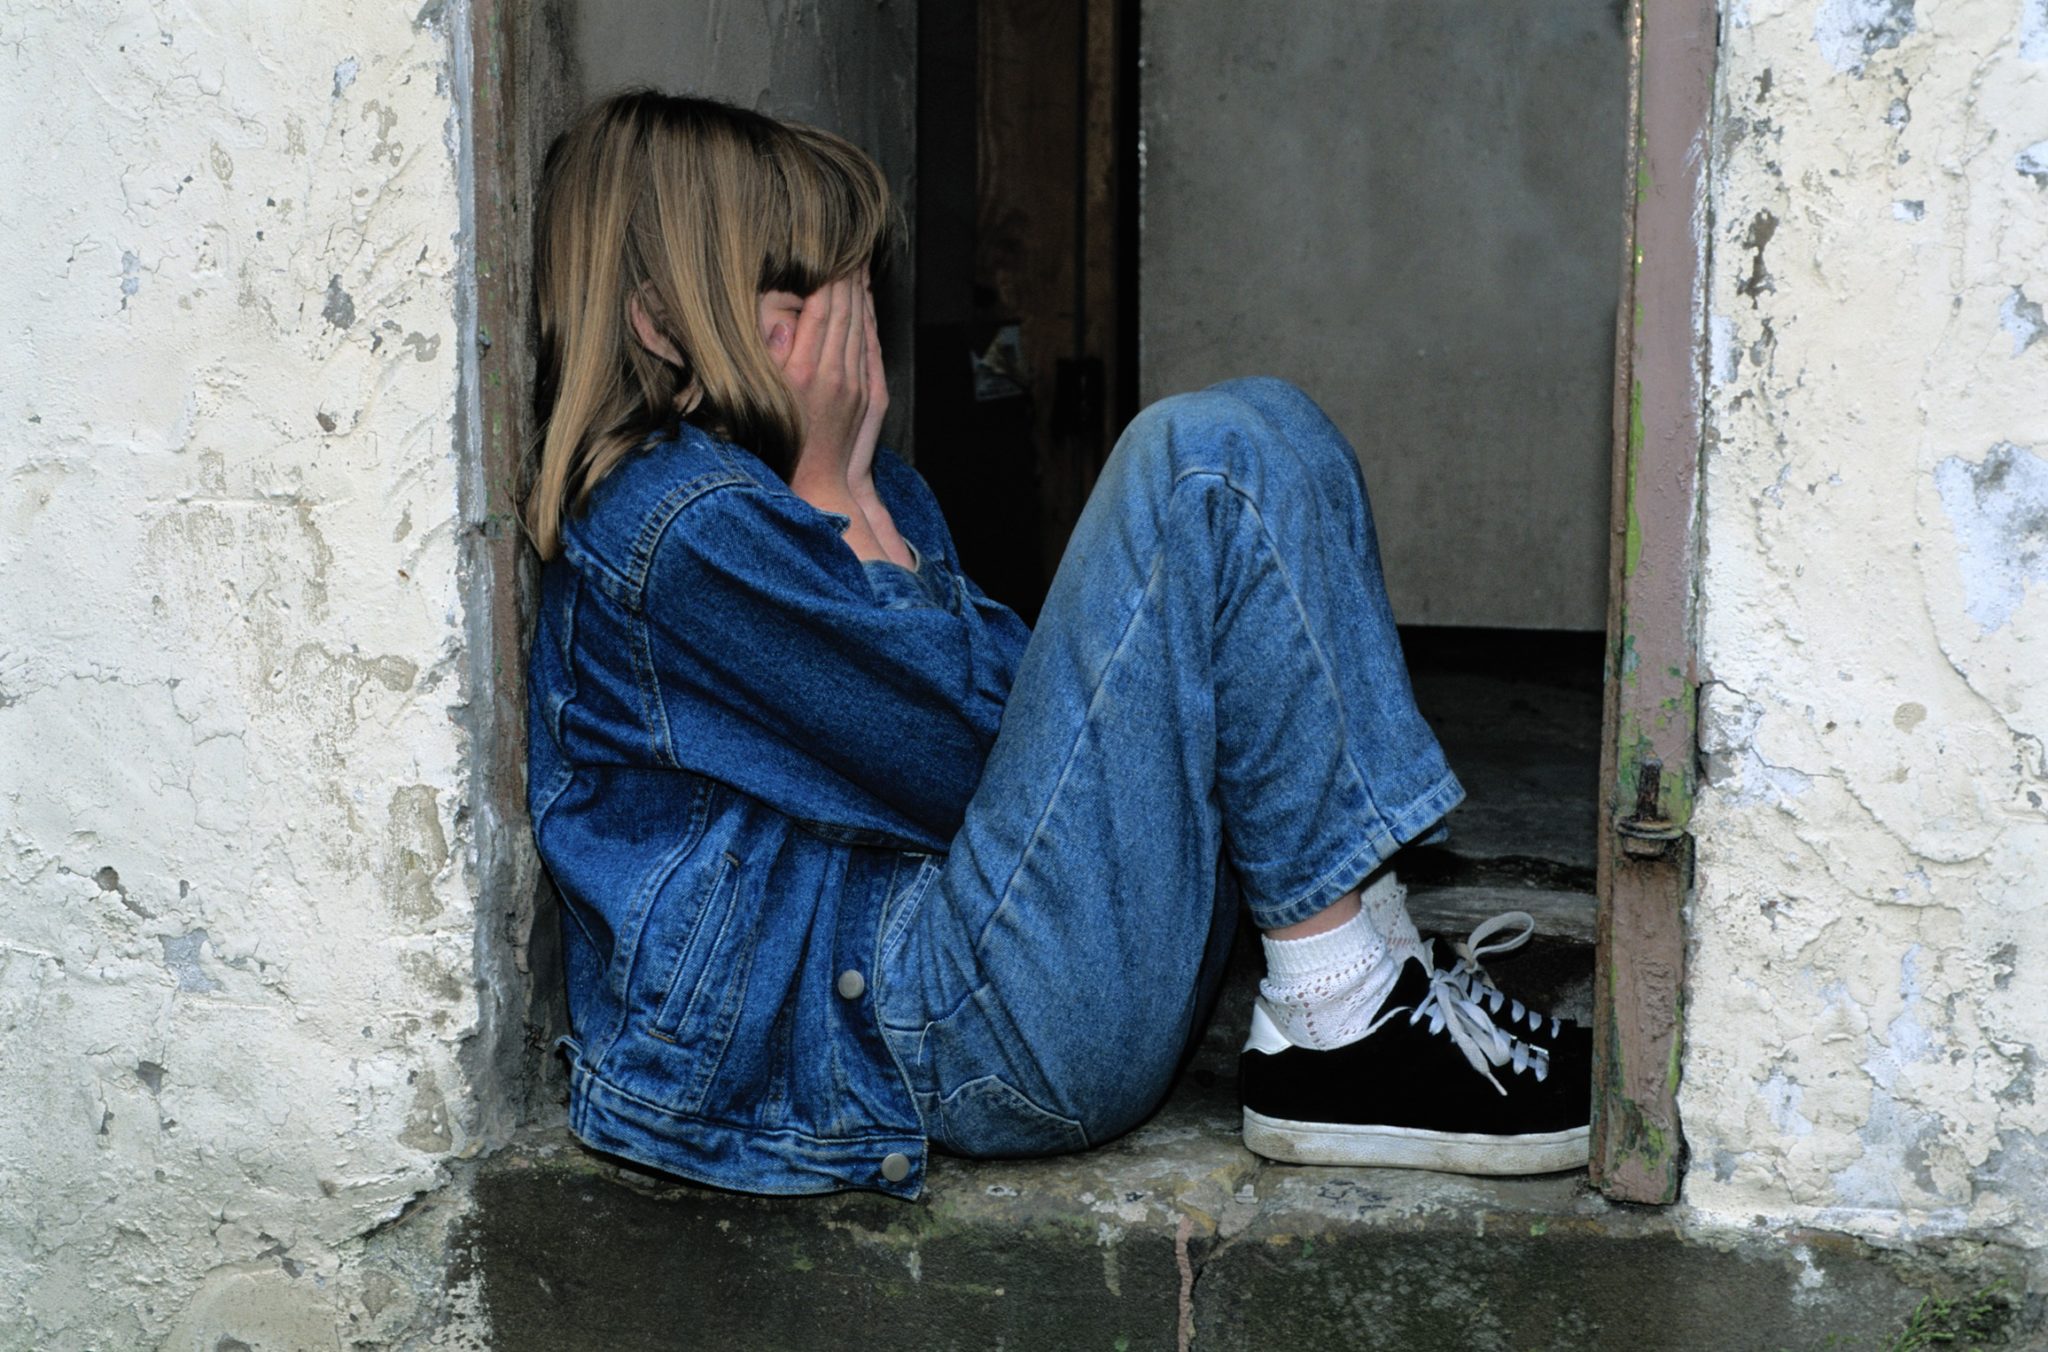 child with hands on face sitting in doorway 2048 x 1352